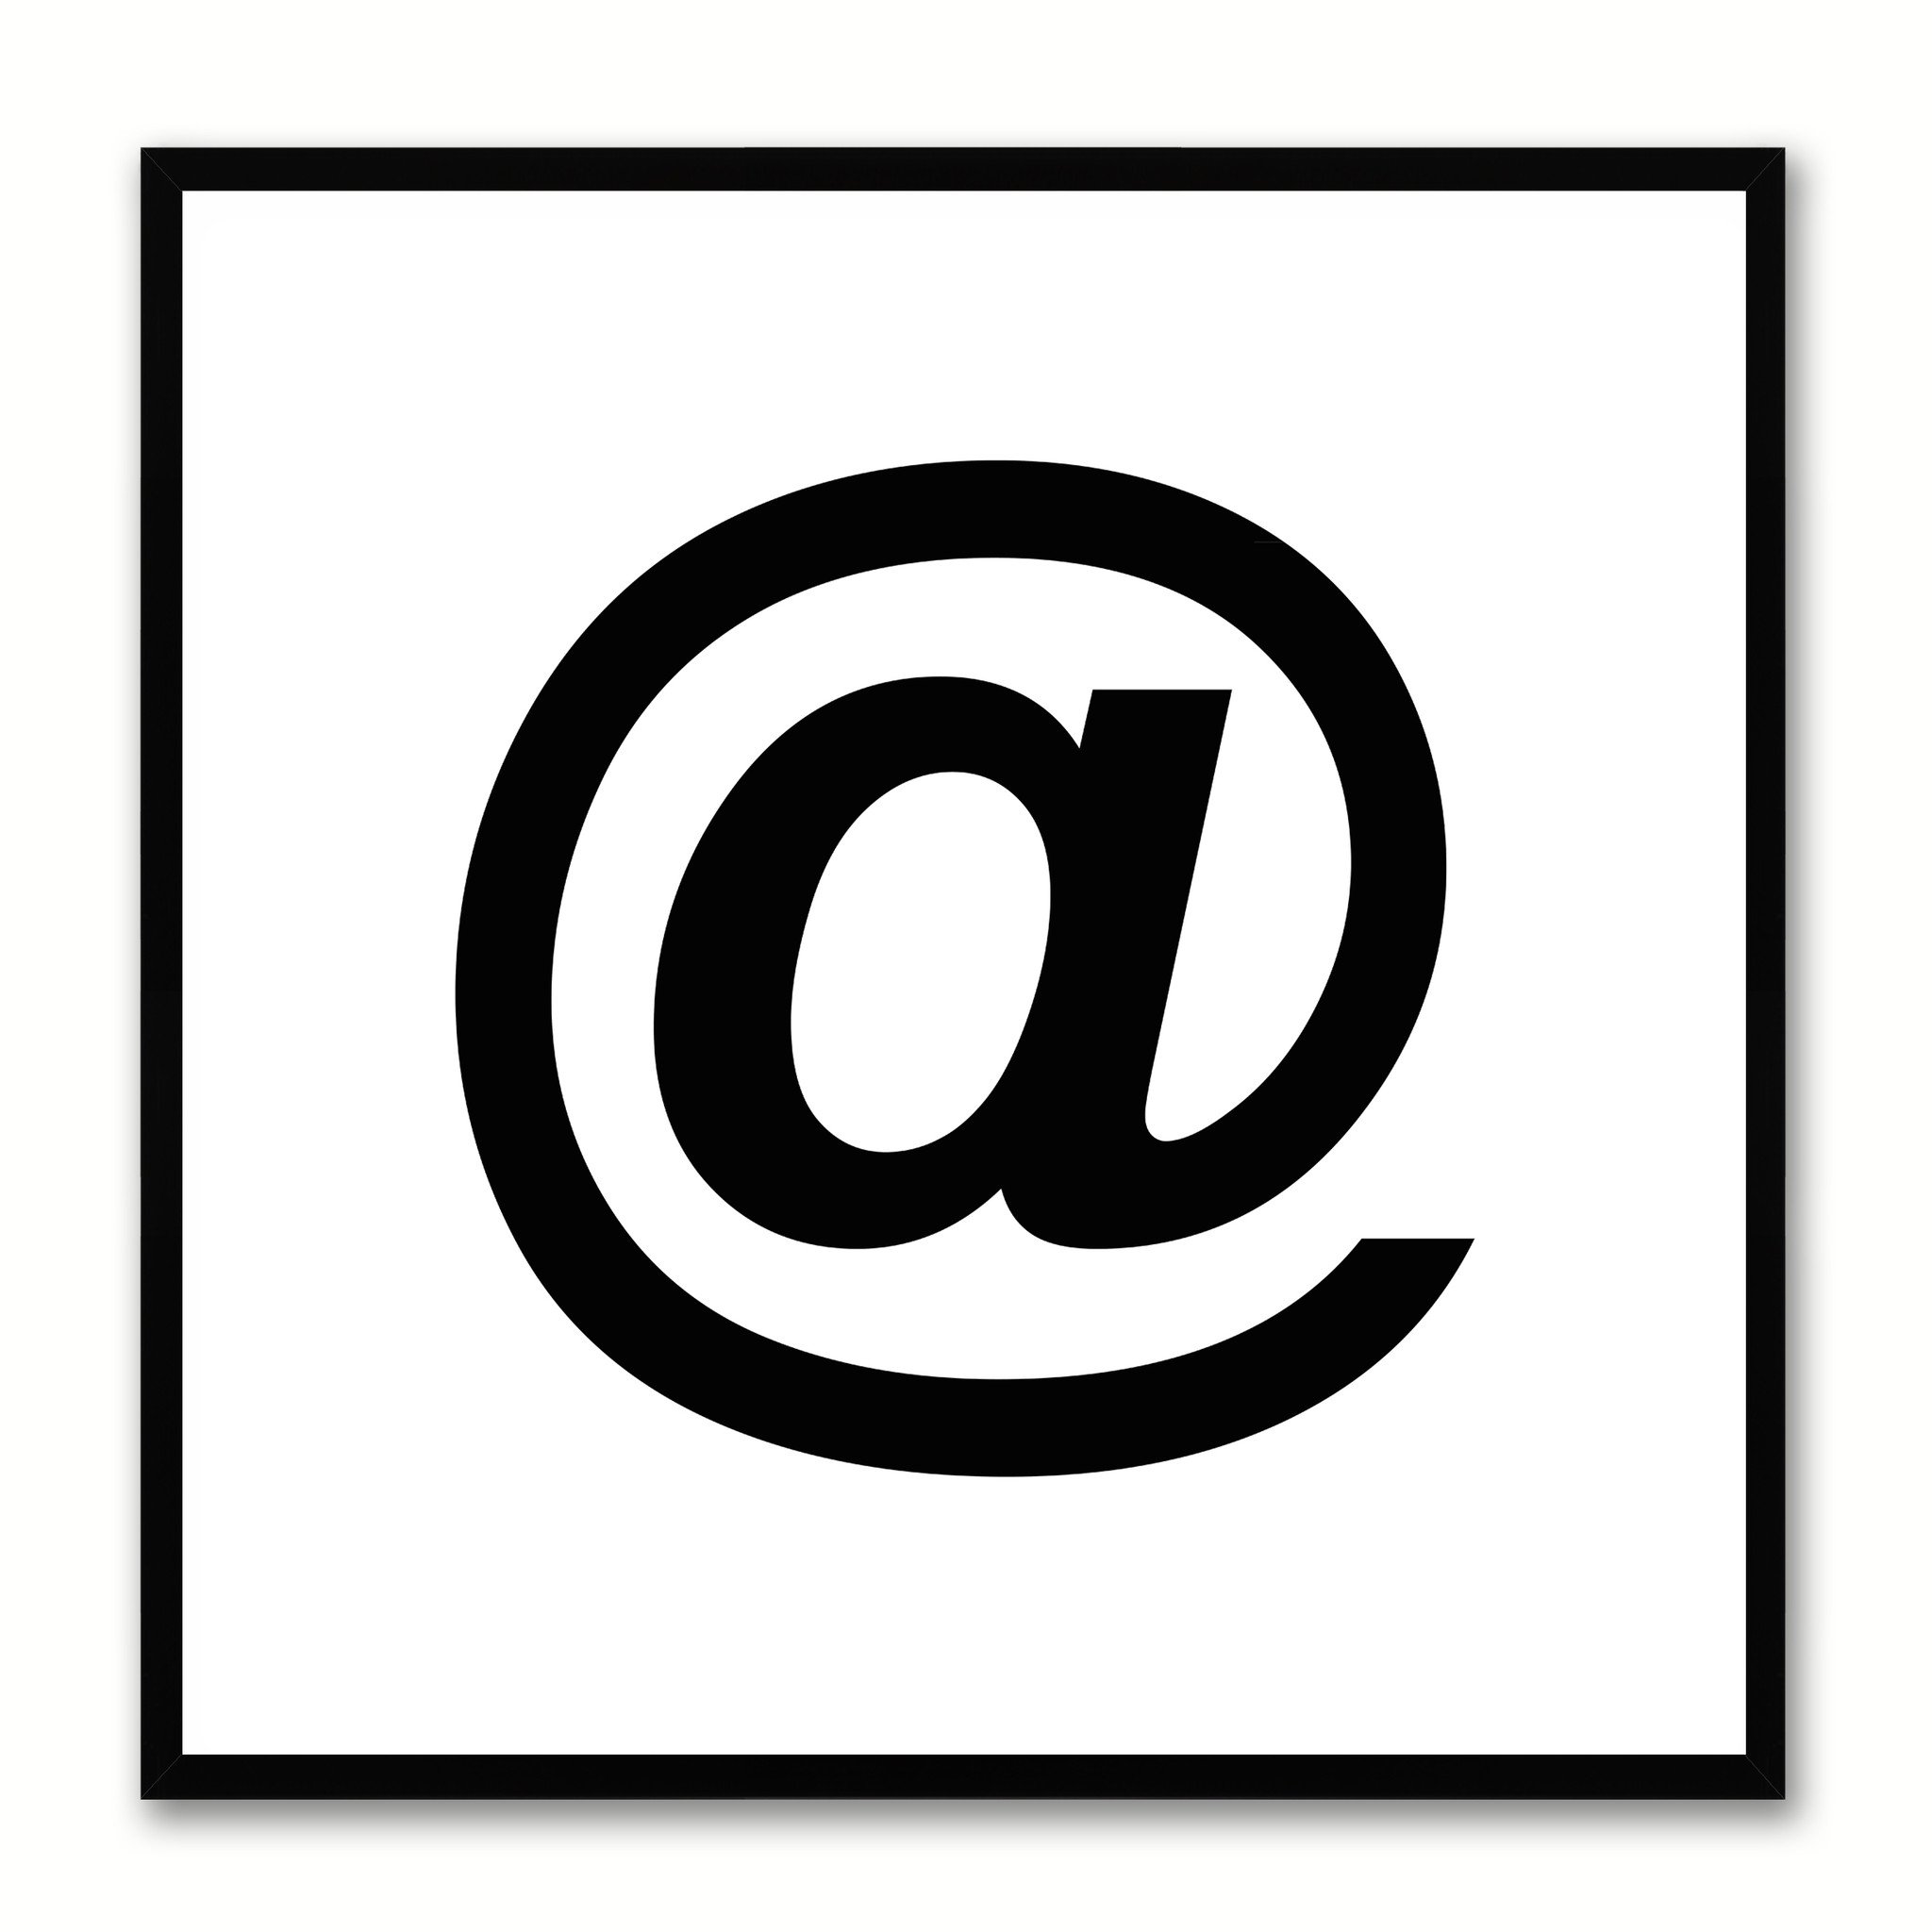 At Sign For Email At email sign icon #5693 - Free Icons and PNG 